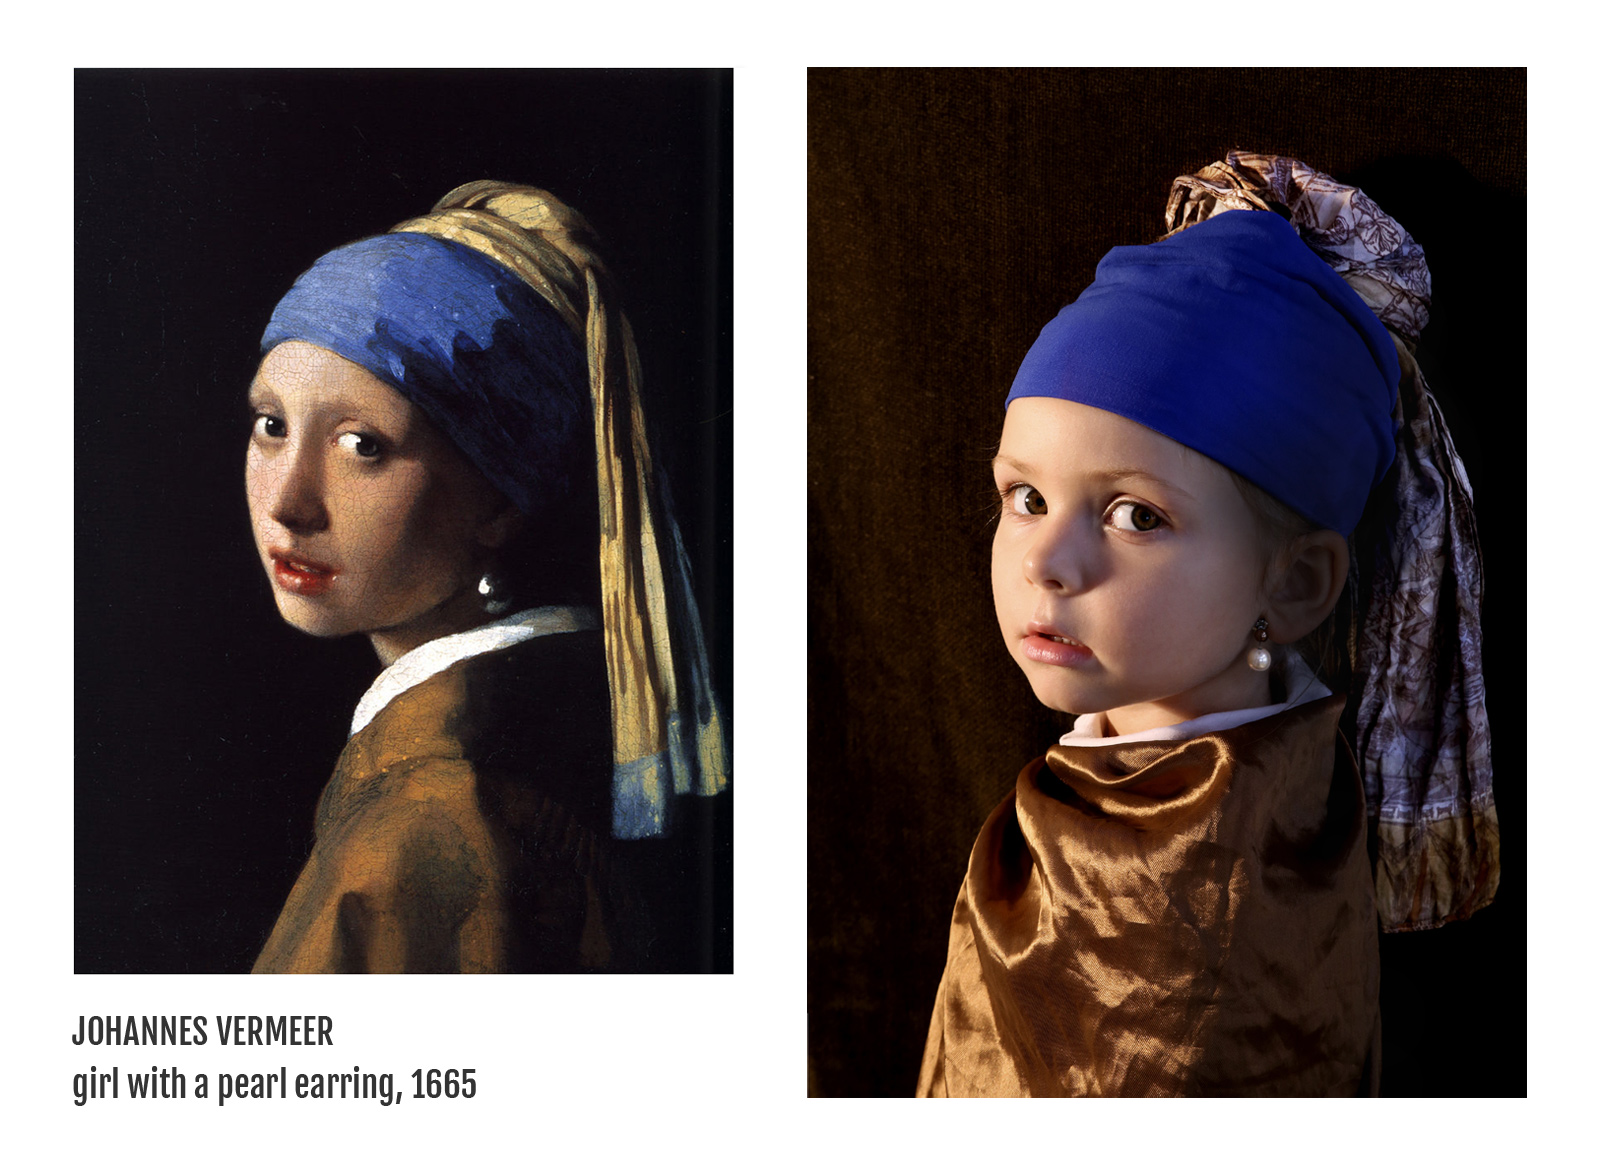 Johannes Vermeer - Girl with a pearl earring